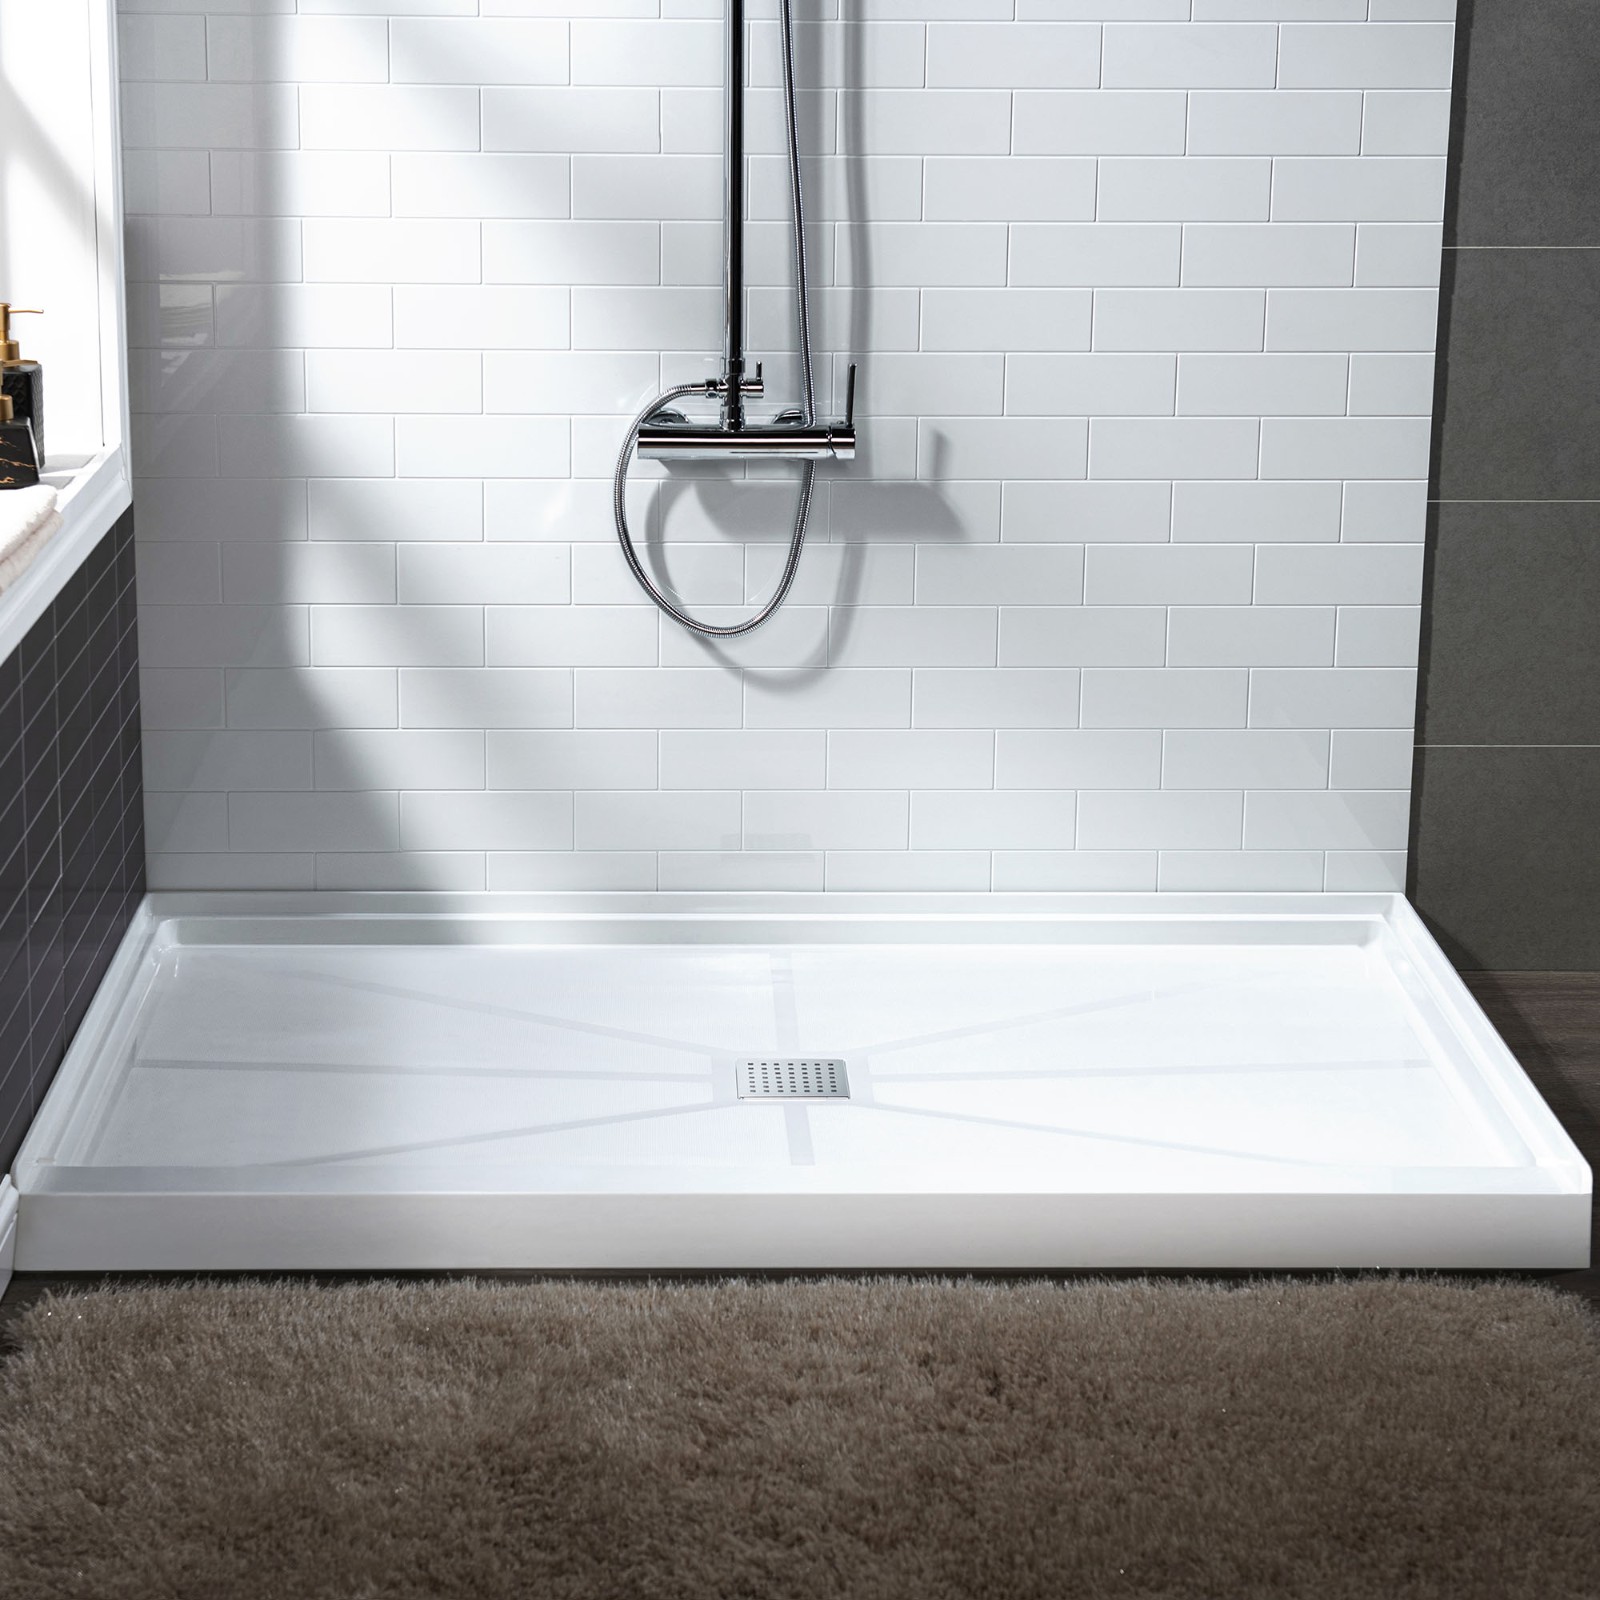  WOODBRIDGE SBR6030-1000C-CH SolidSurface Shower Base with Recessed Trench Side Including  Chrome Linear Cover, 60